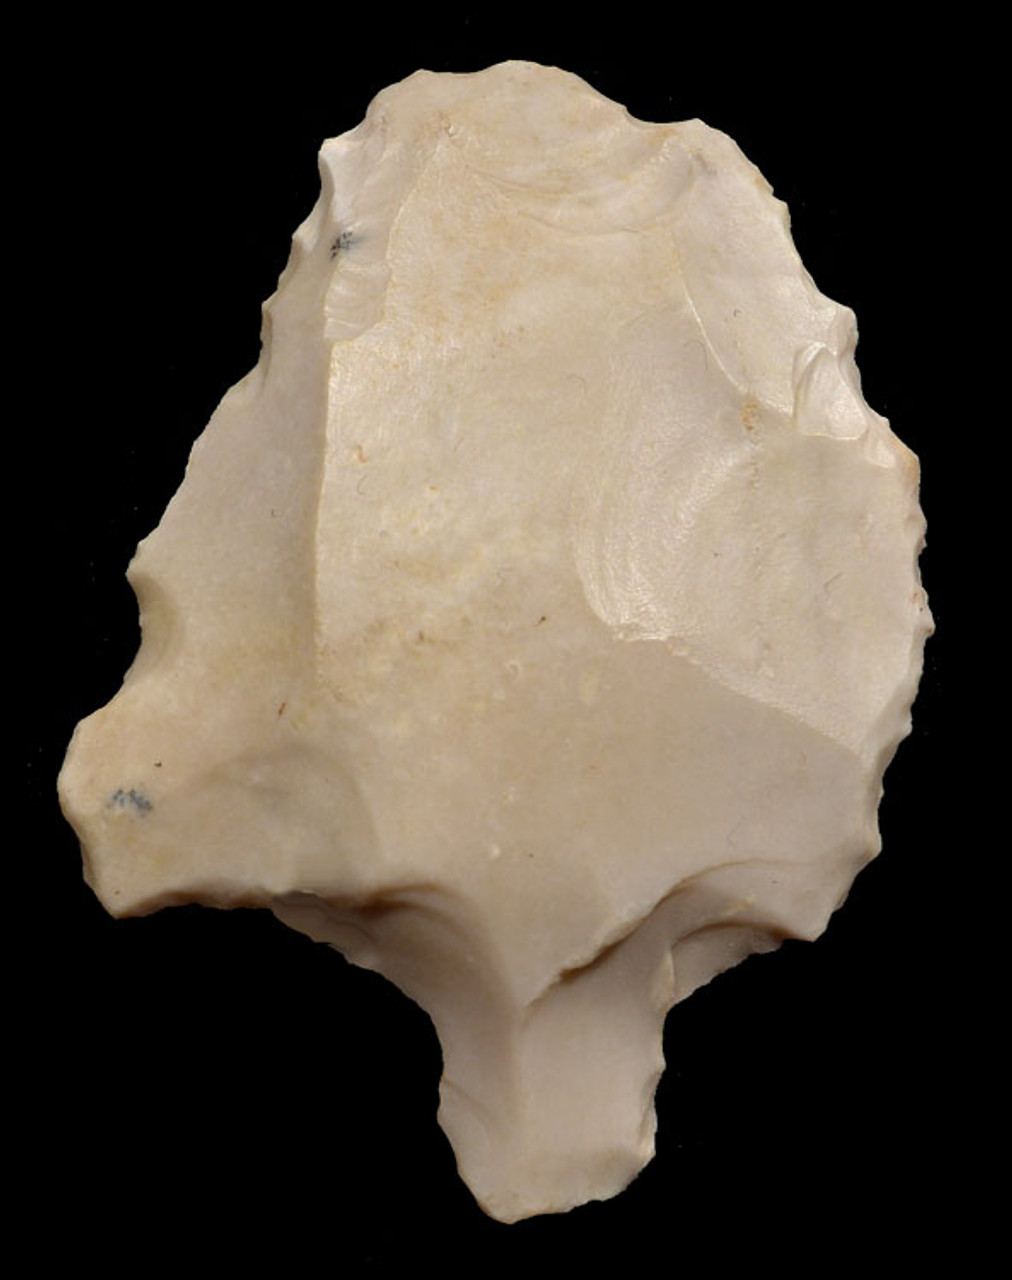 STUNNING RARE WHITE JASPER ATERIAN MIDDLE PALEOLITHIC TANGED POINT - OLDEST ARROWHEAD *AT086